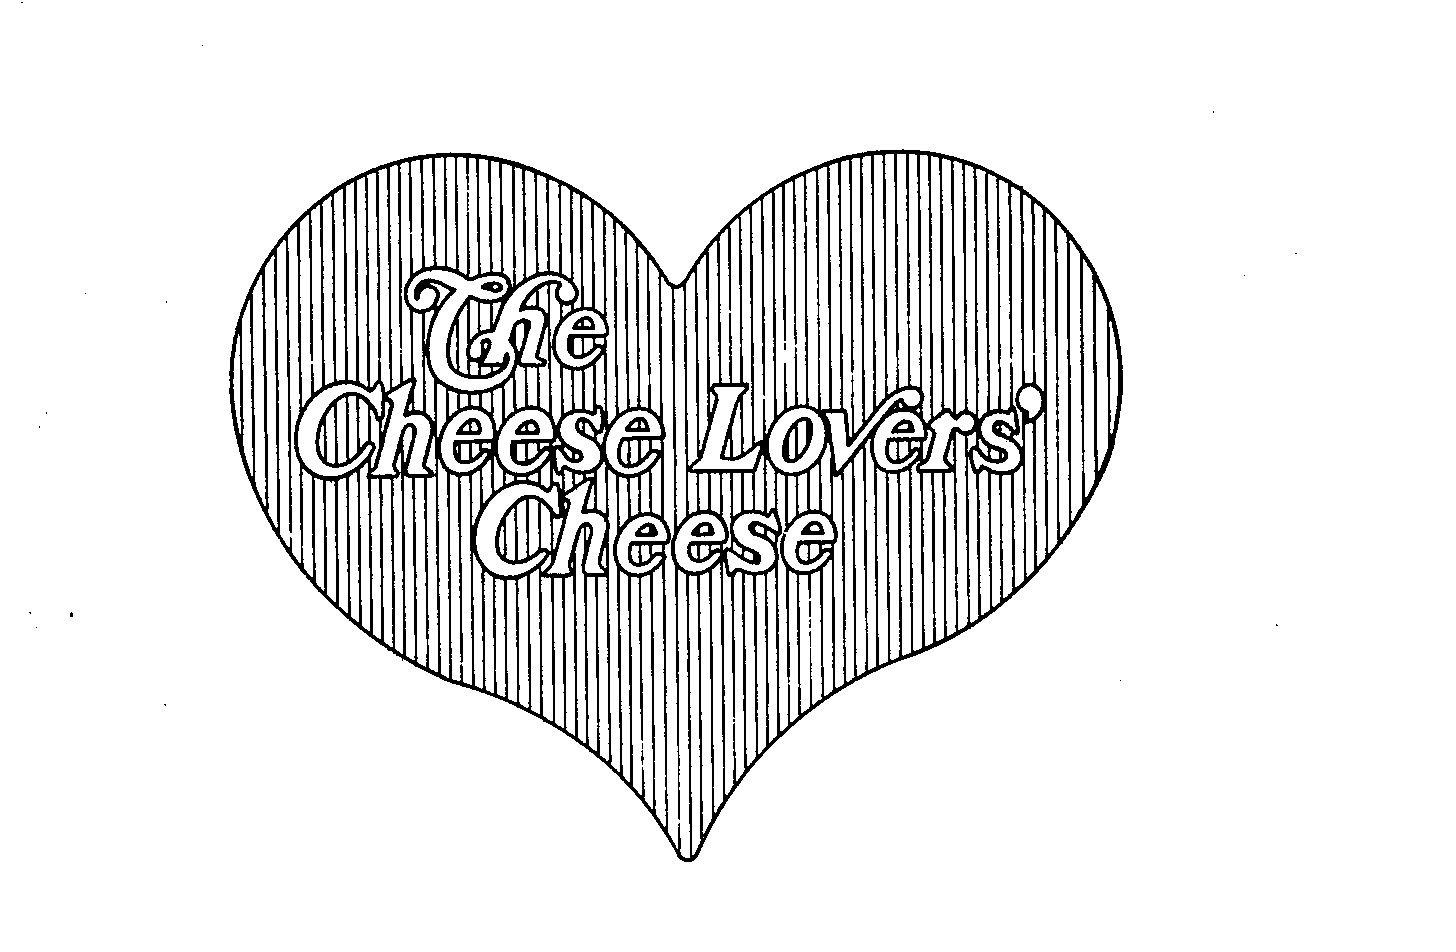  THE CHEESE LOVERS' CHEESE